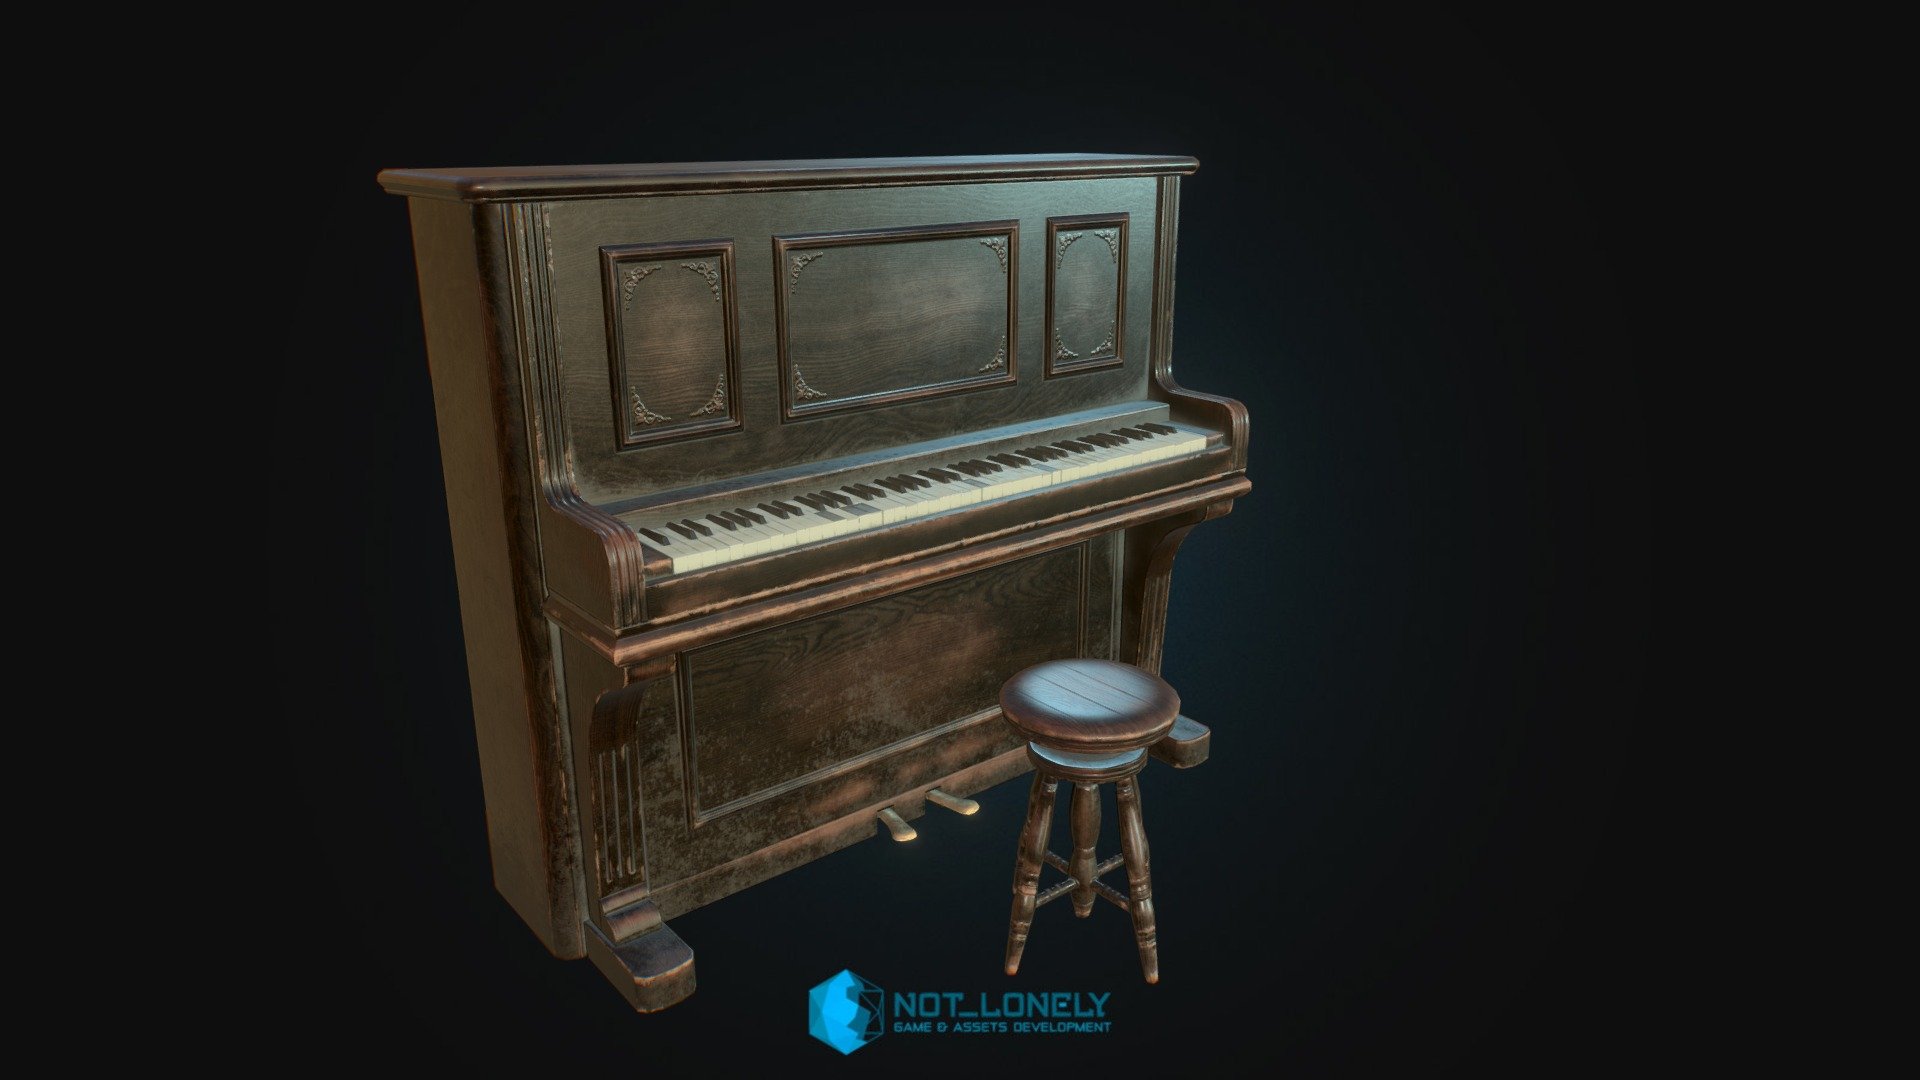 An old piano for my new art asset: http://not-lonely.com/assets/hq-western-saloon/
Textured in Substance Painter 3d model